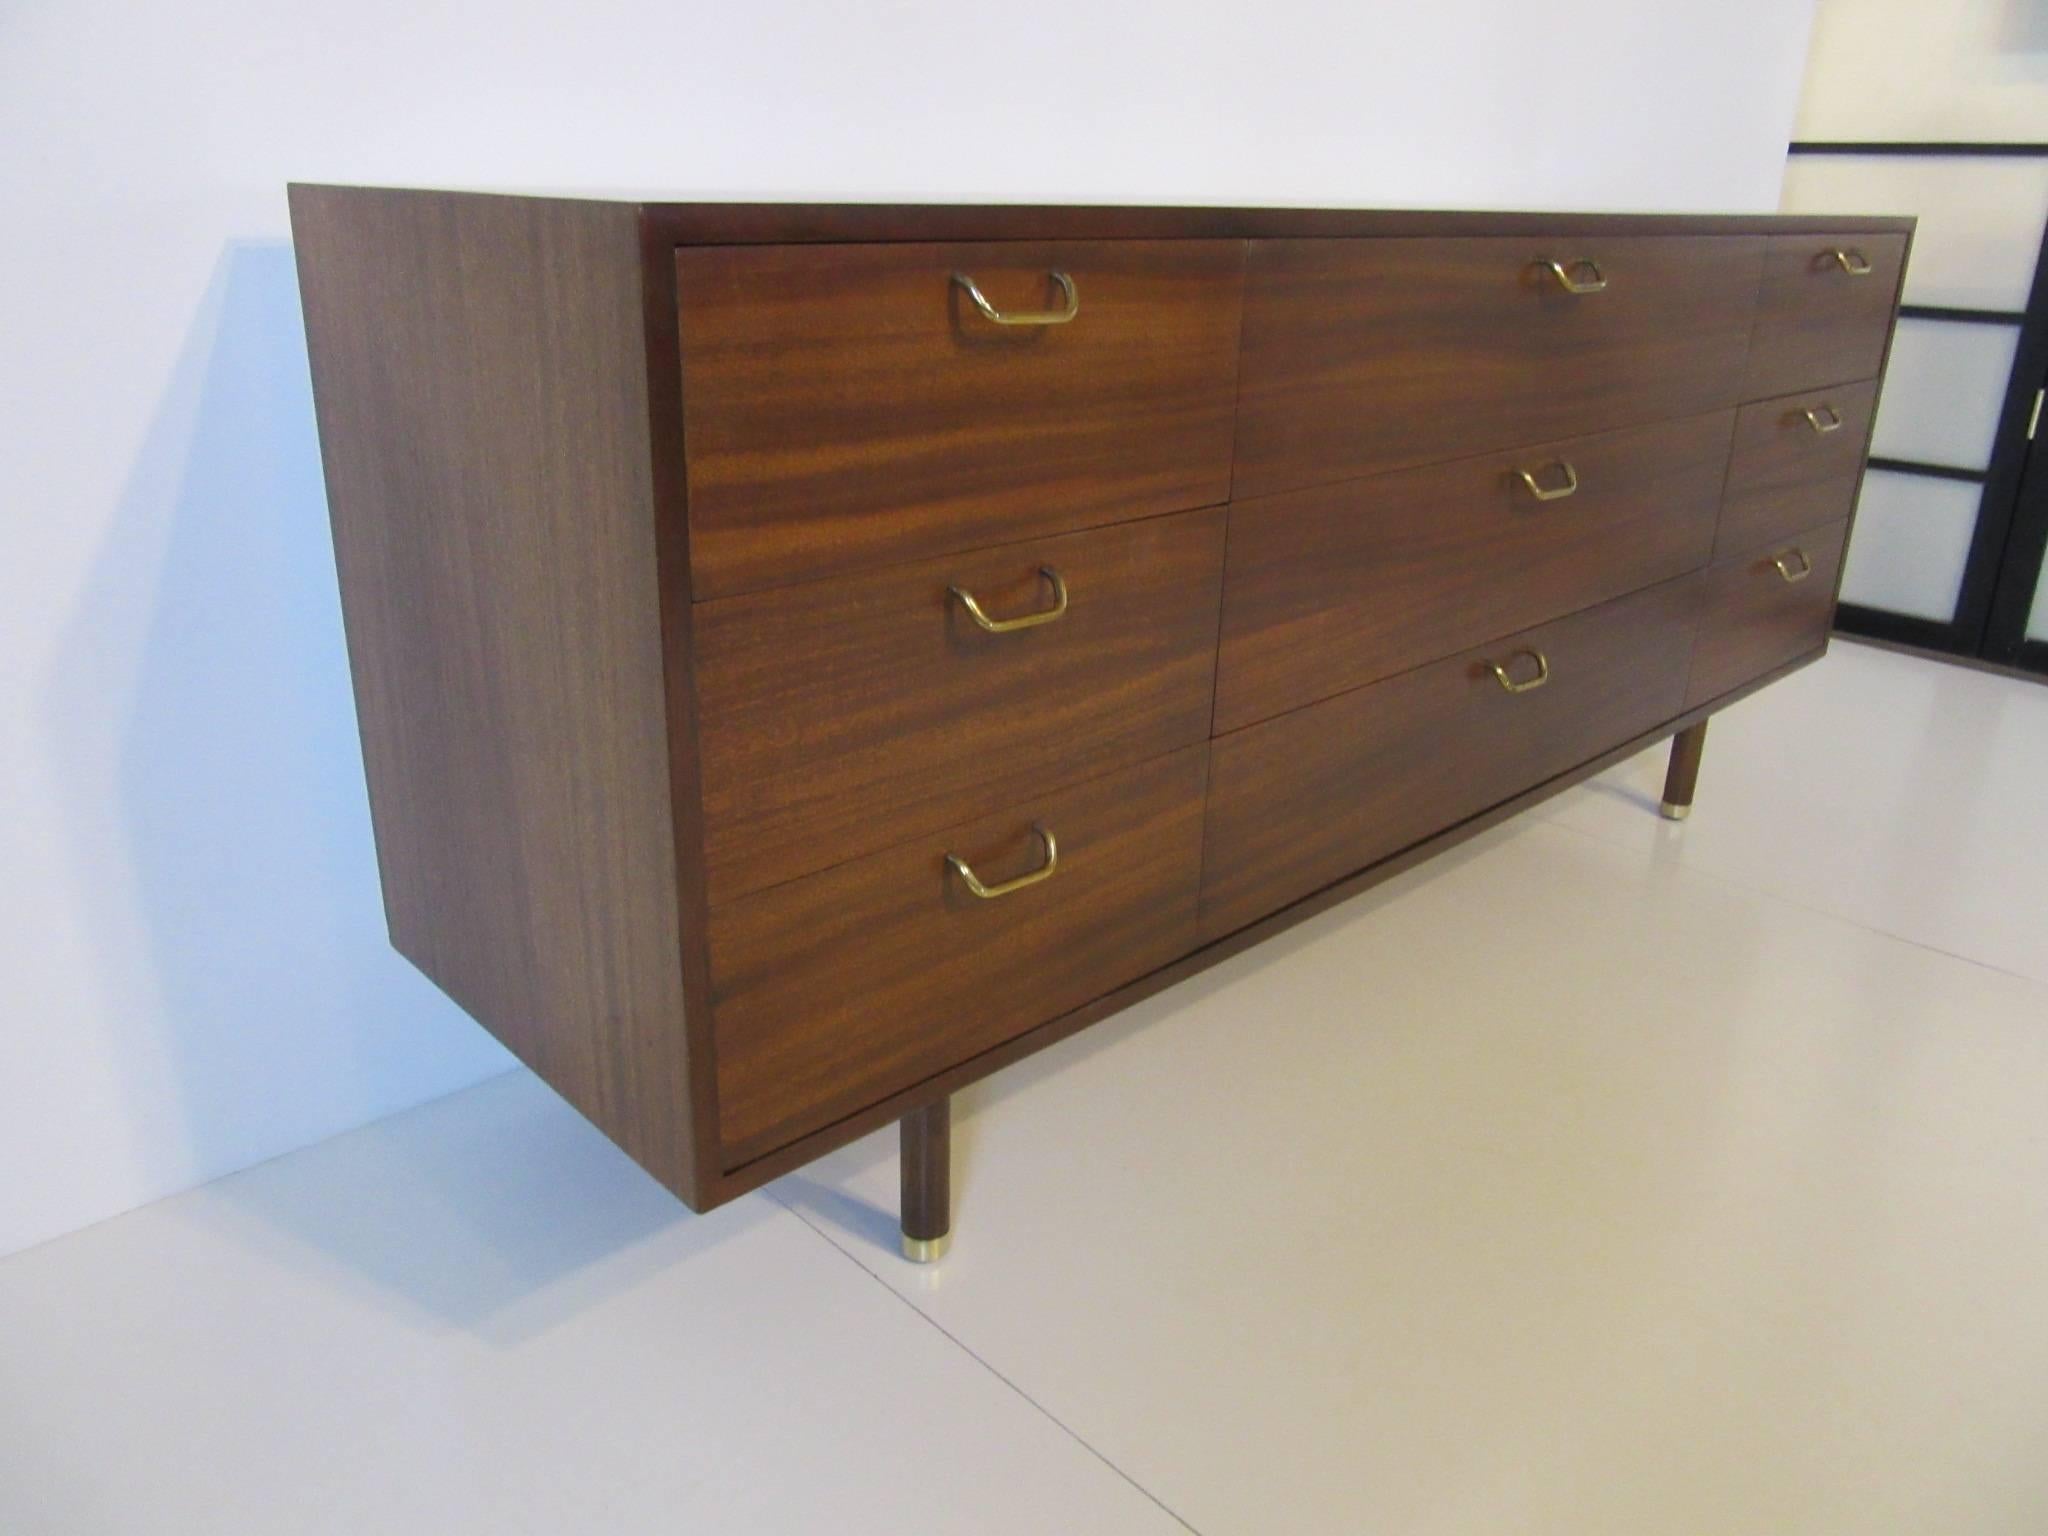 A mahogany nine-drawer dresser chest with solid curved brass pulls and foot caps to the legs the top middle drawer having dividers. Wonderful graining to the wood gives the piece a rich look, retains the manufactures tag 